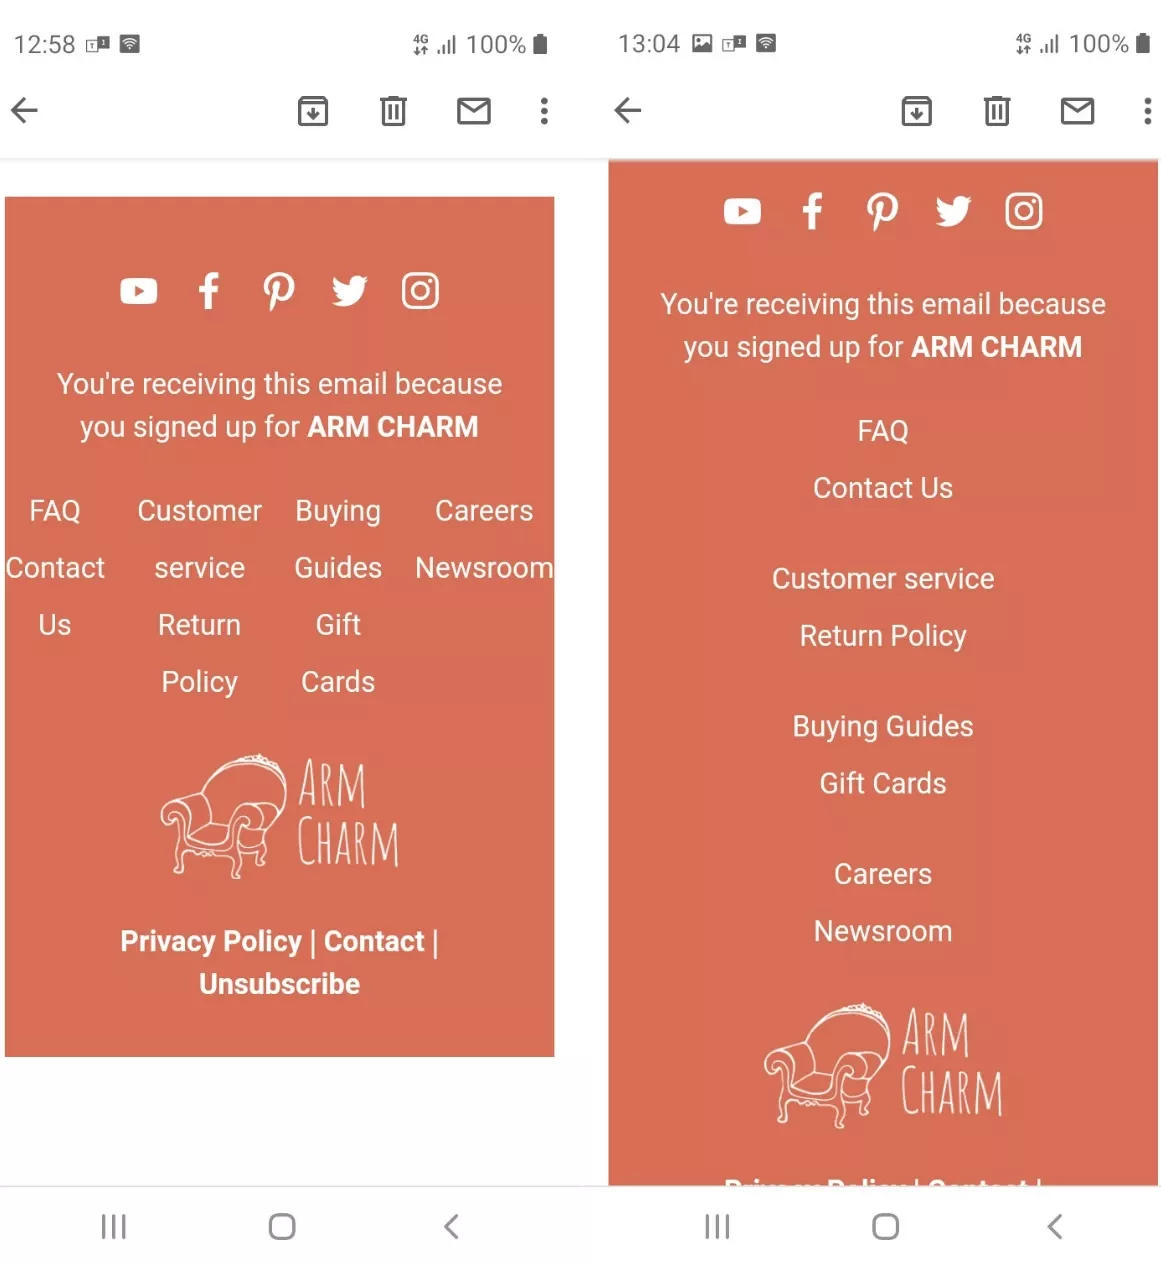 Two screenshots of an ARM CHARM email footer on a mobile device, showing social media icons, a subscription confirmation message, and links for FAQ, customer service, return policy, buying guides, gift cards, careers, newsroom, privacy policy, contact, and unsubscribe. The image is example of adaptive vs. non-adaptive email footer